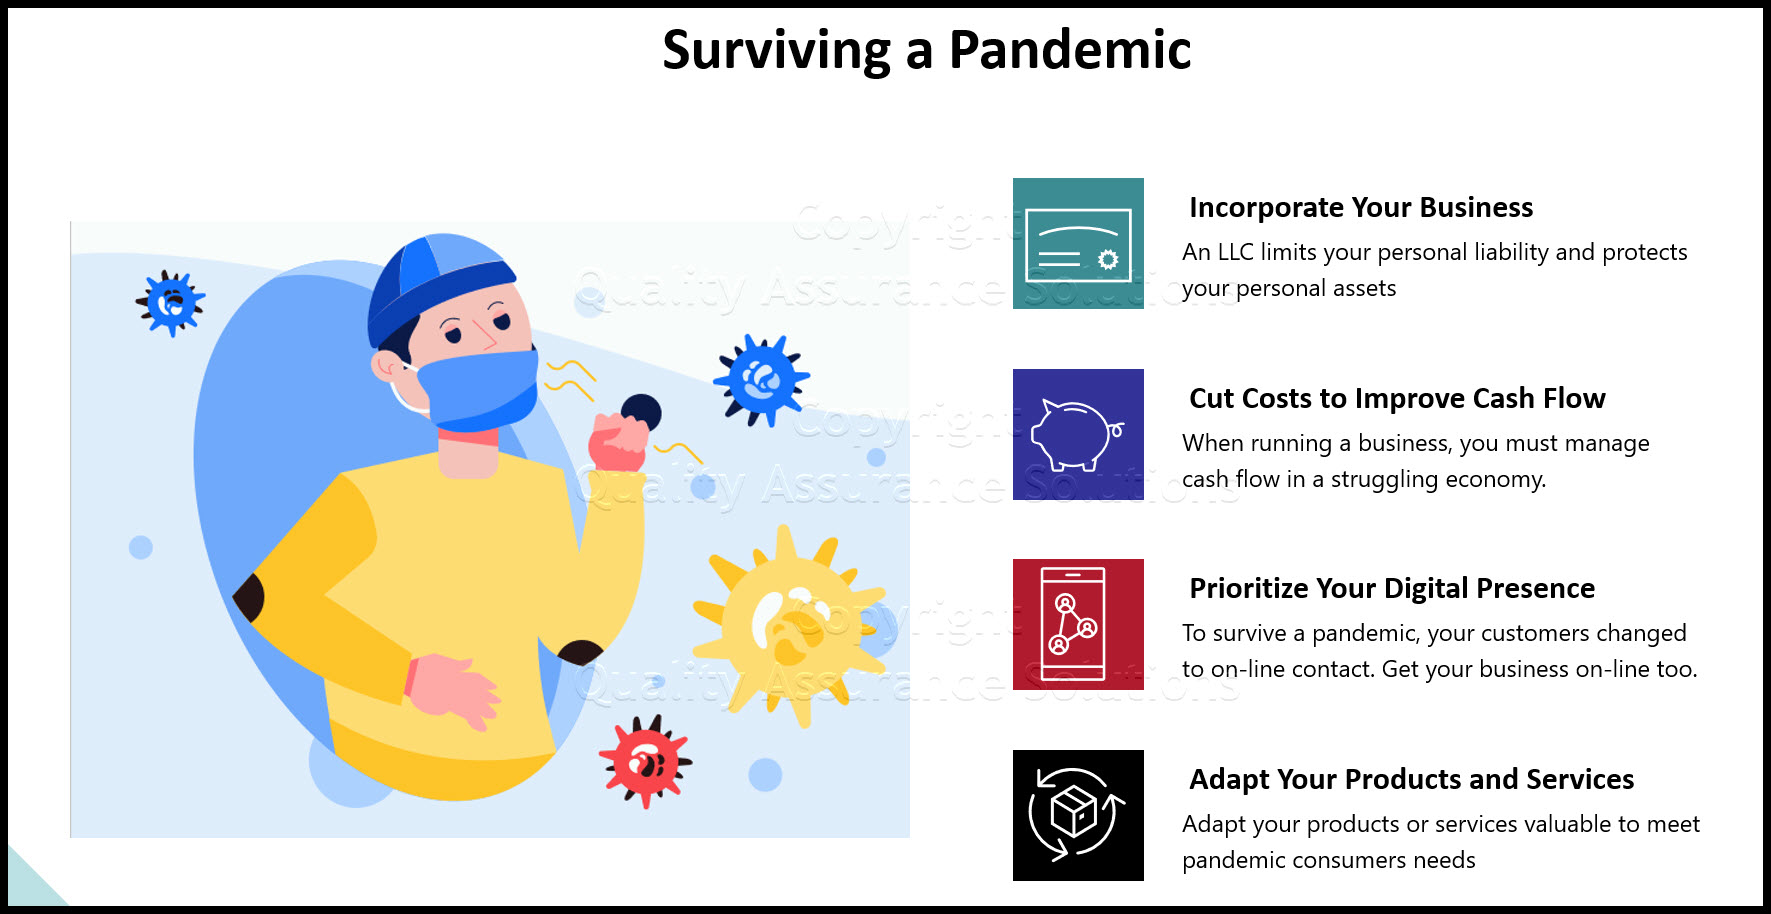 How to survive a pandemic, tips for small businesses